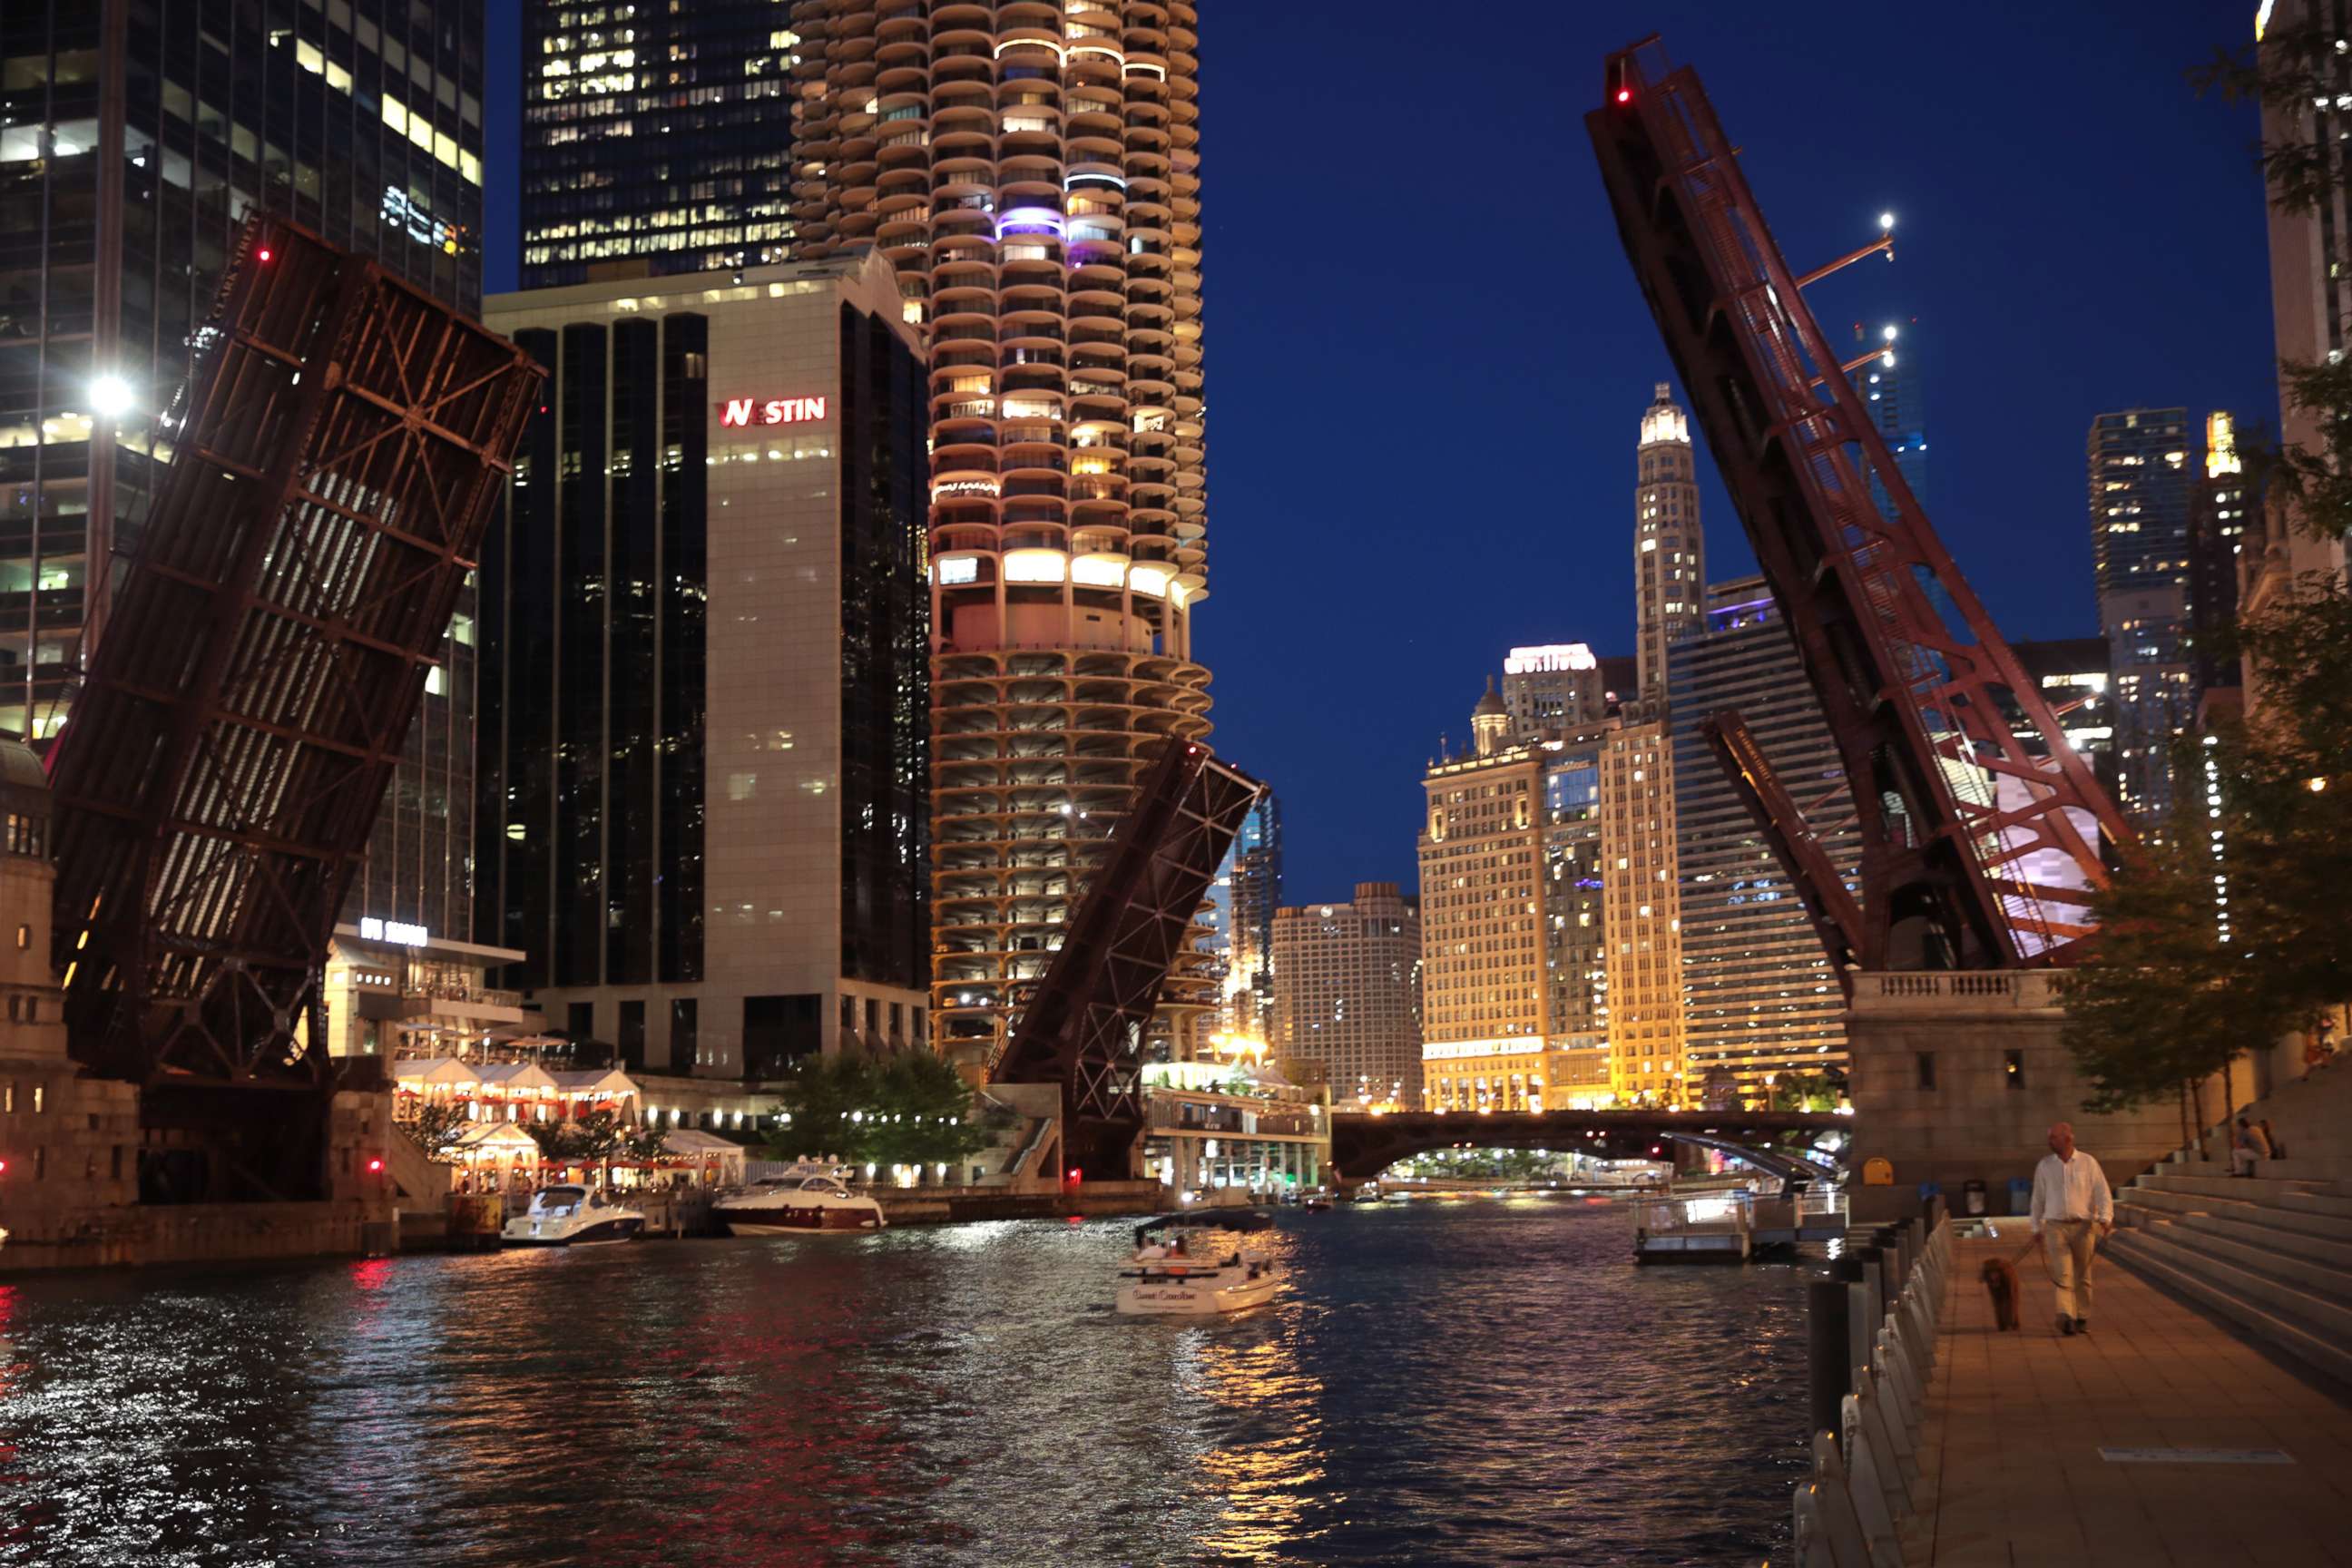 PHOTO: CHICAGO, ILLINOIS - AUGUST 12: Bridges across the Chicago river are raised to control access into downtown after widespread looting broke out early Monday in the city on August 12, 2020 in Chicago, Illinois. 